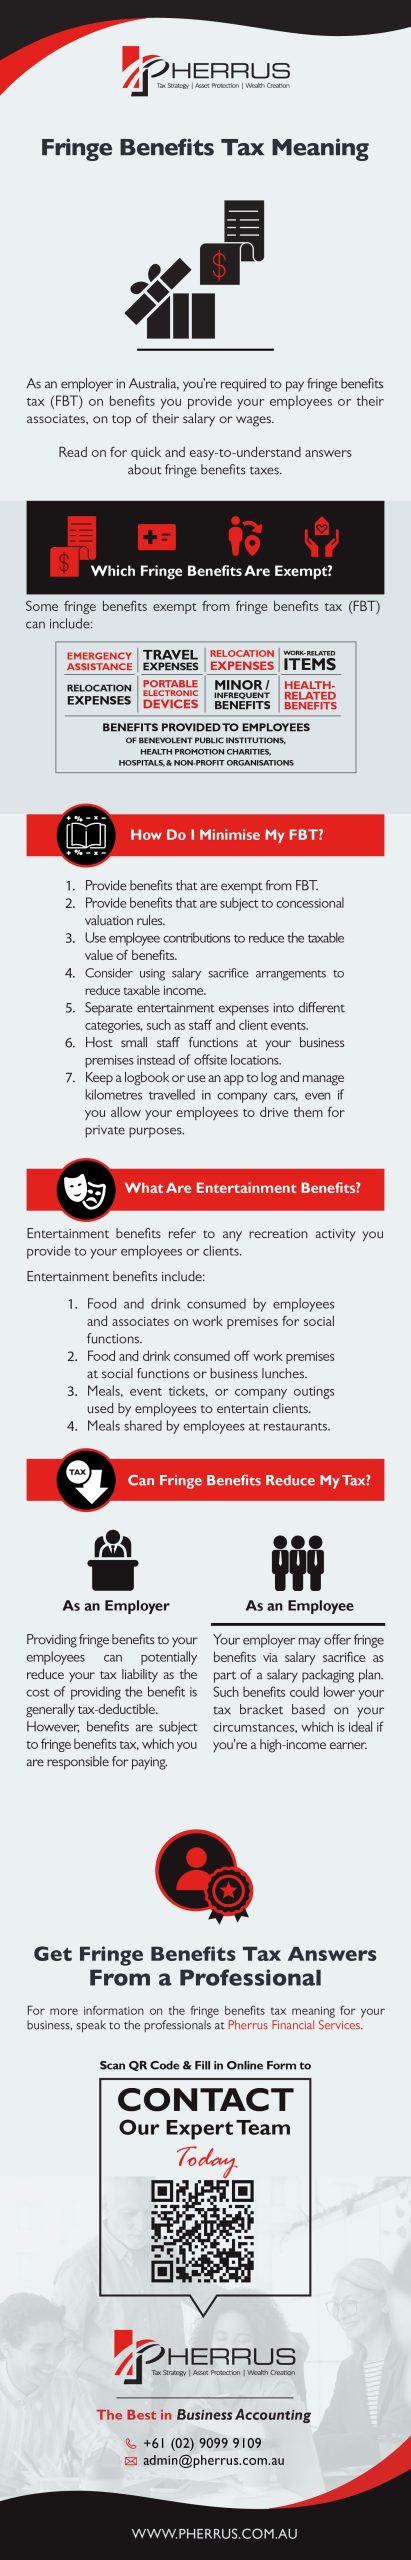 Fringe Benefits Tax Meaning Infographic